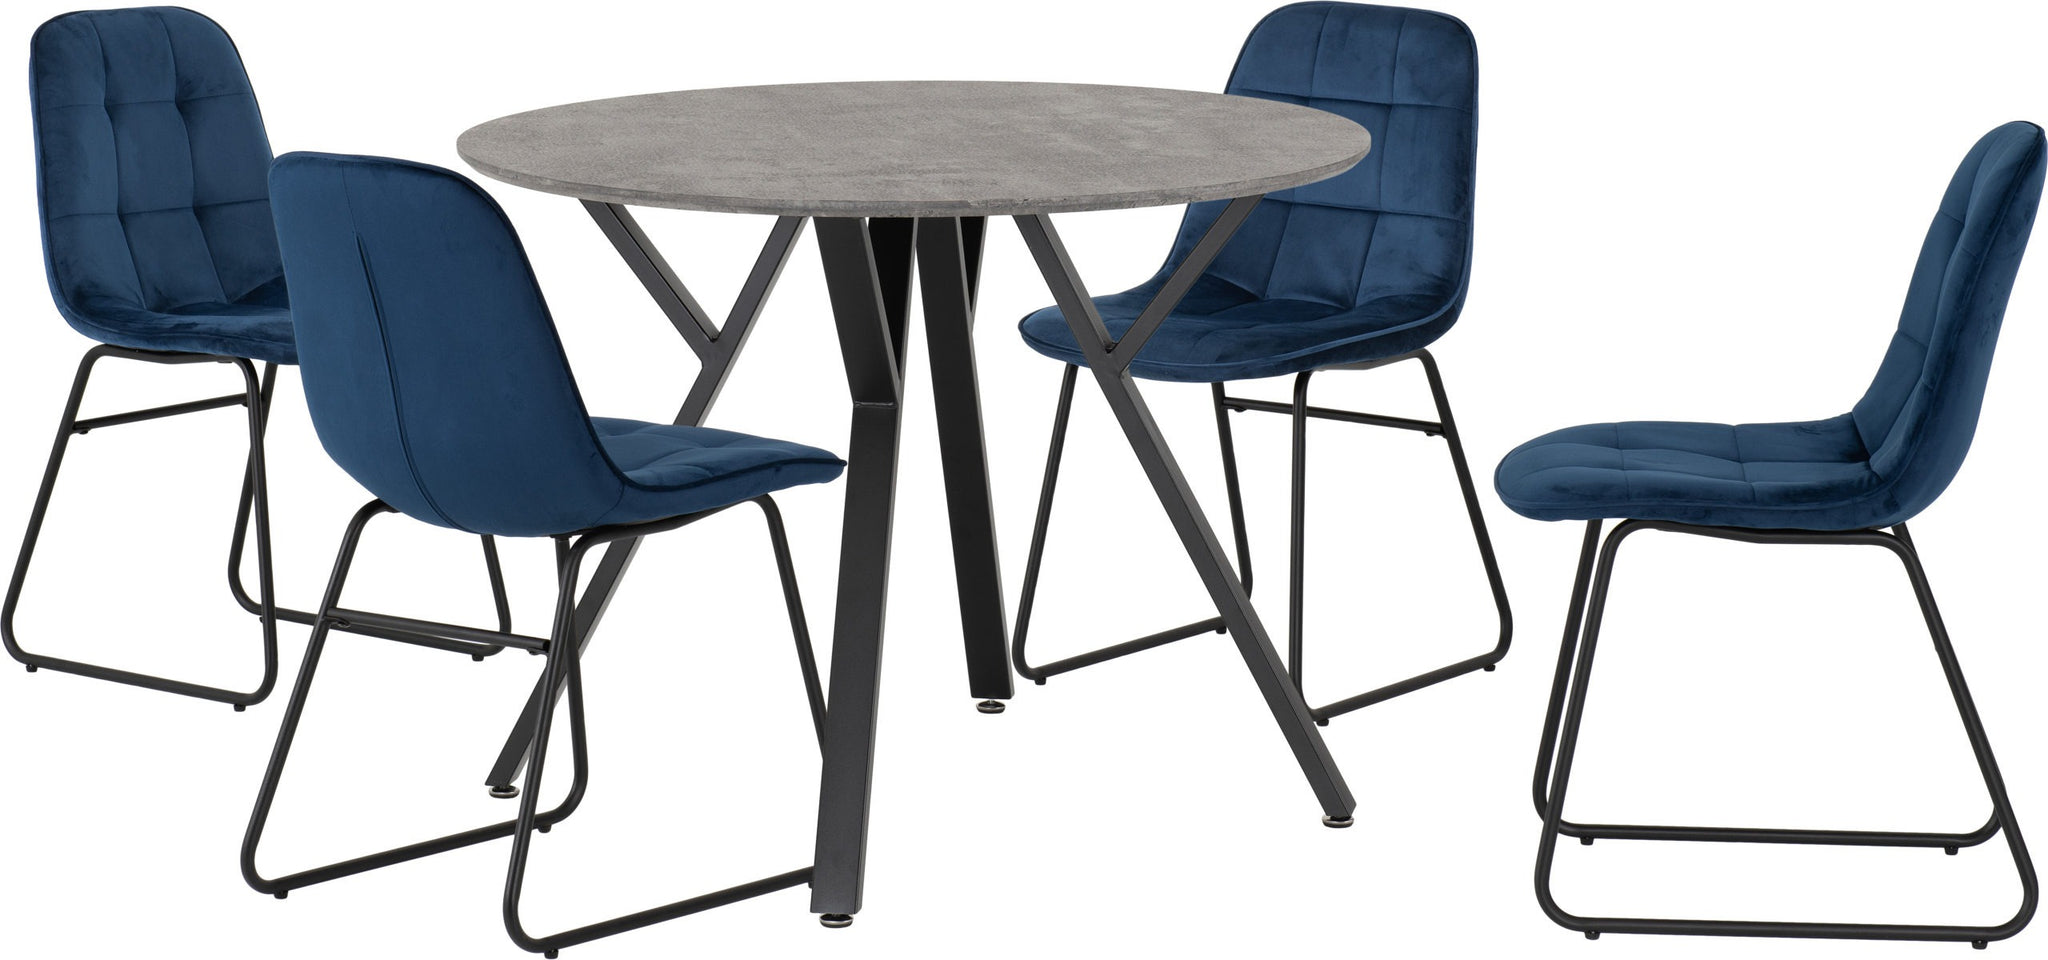 Athens Round Dining Set with Lukas Chairs - Concrete Effect/Black/Sapphire Blue Velvet